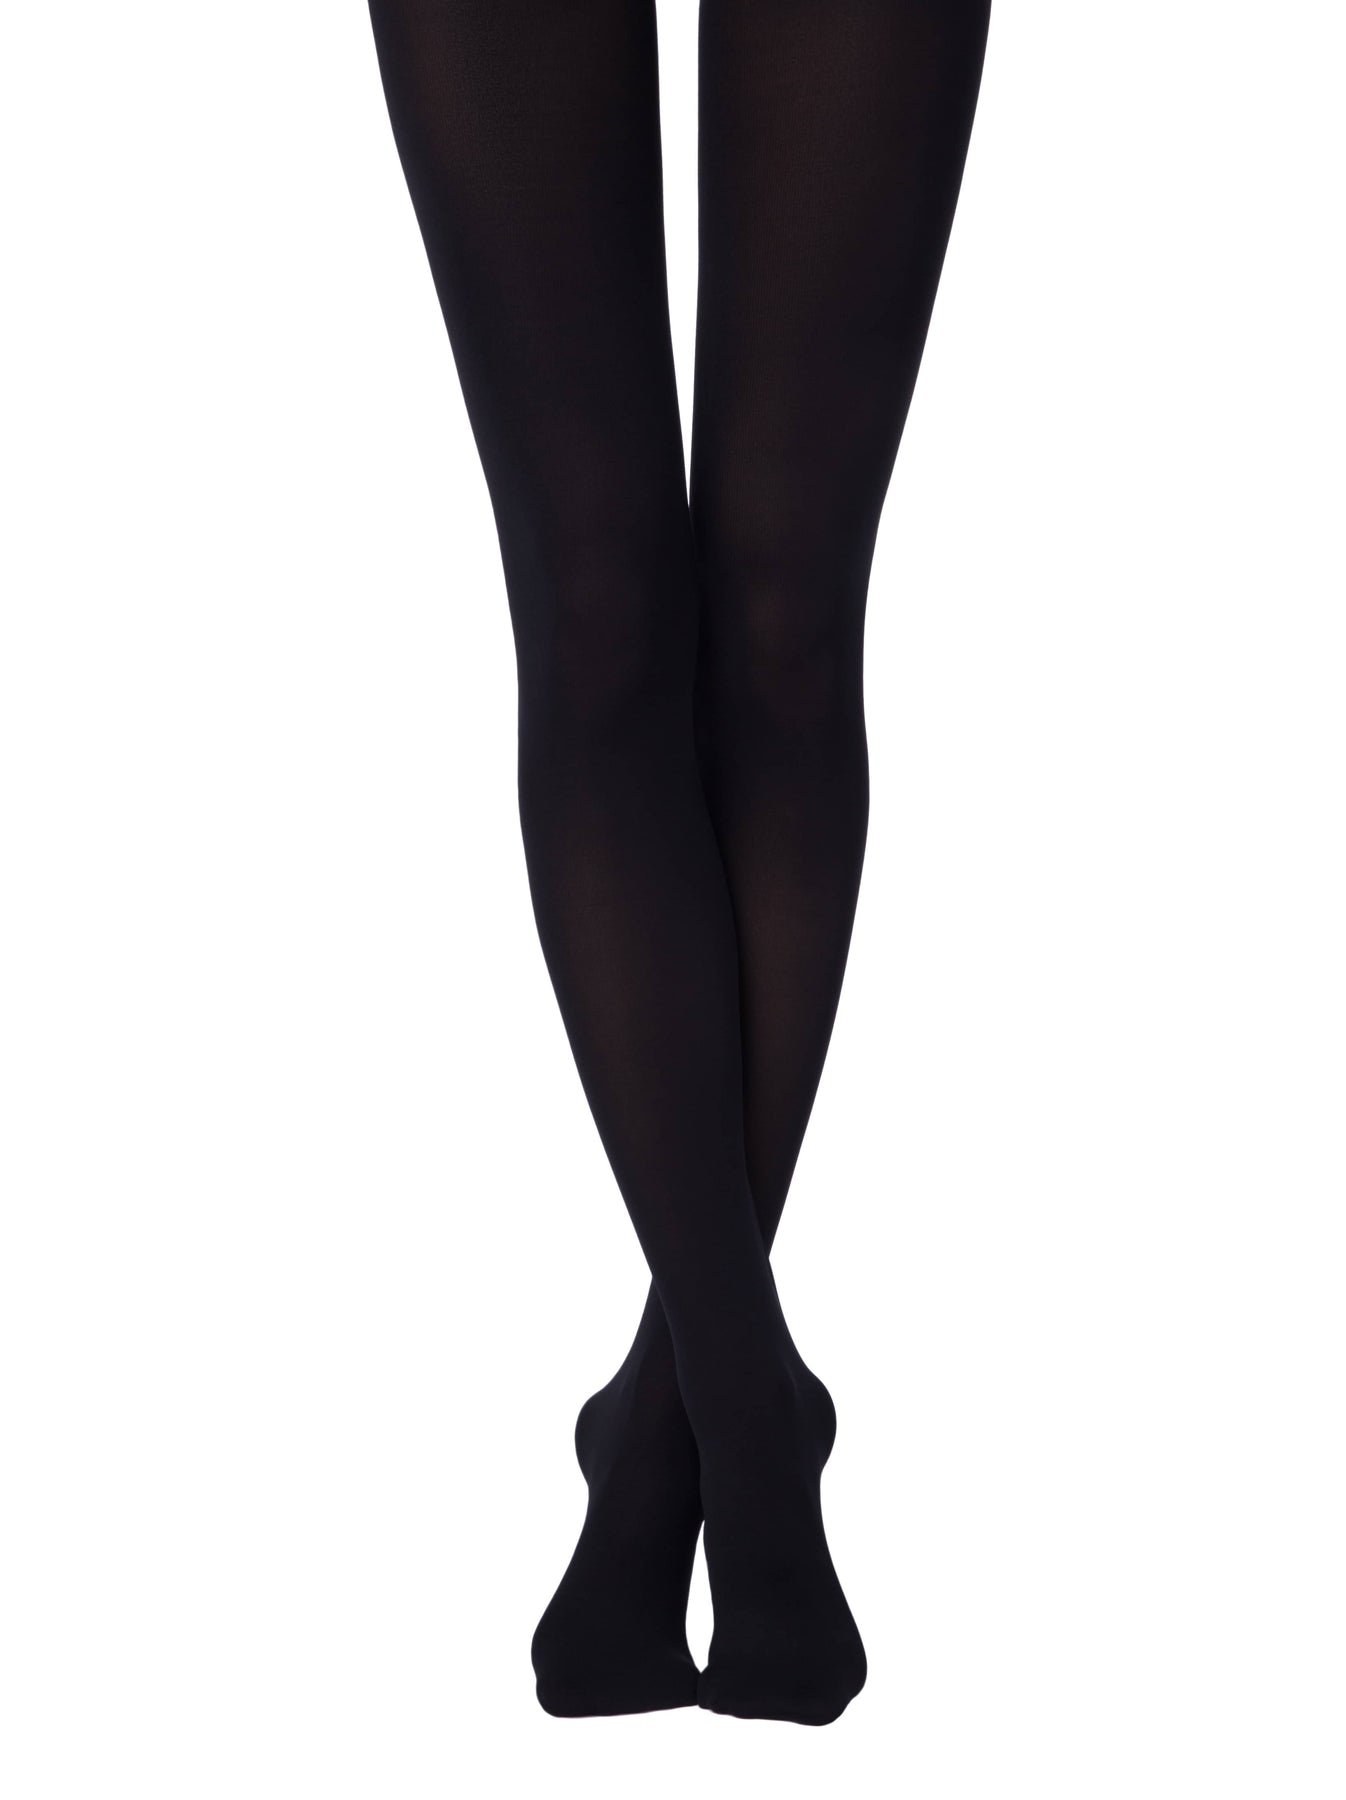 MICROCOTTON 200 denier cotton tights with effect 3D